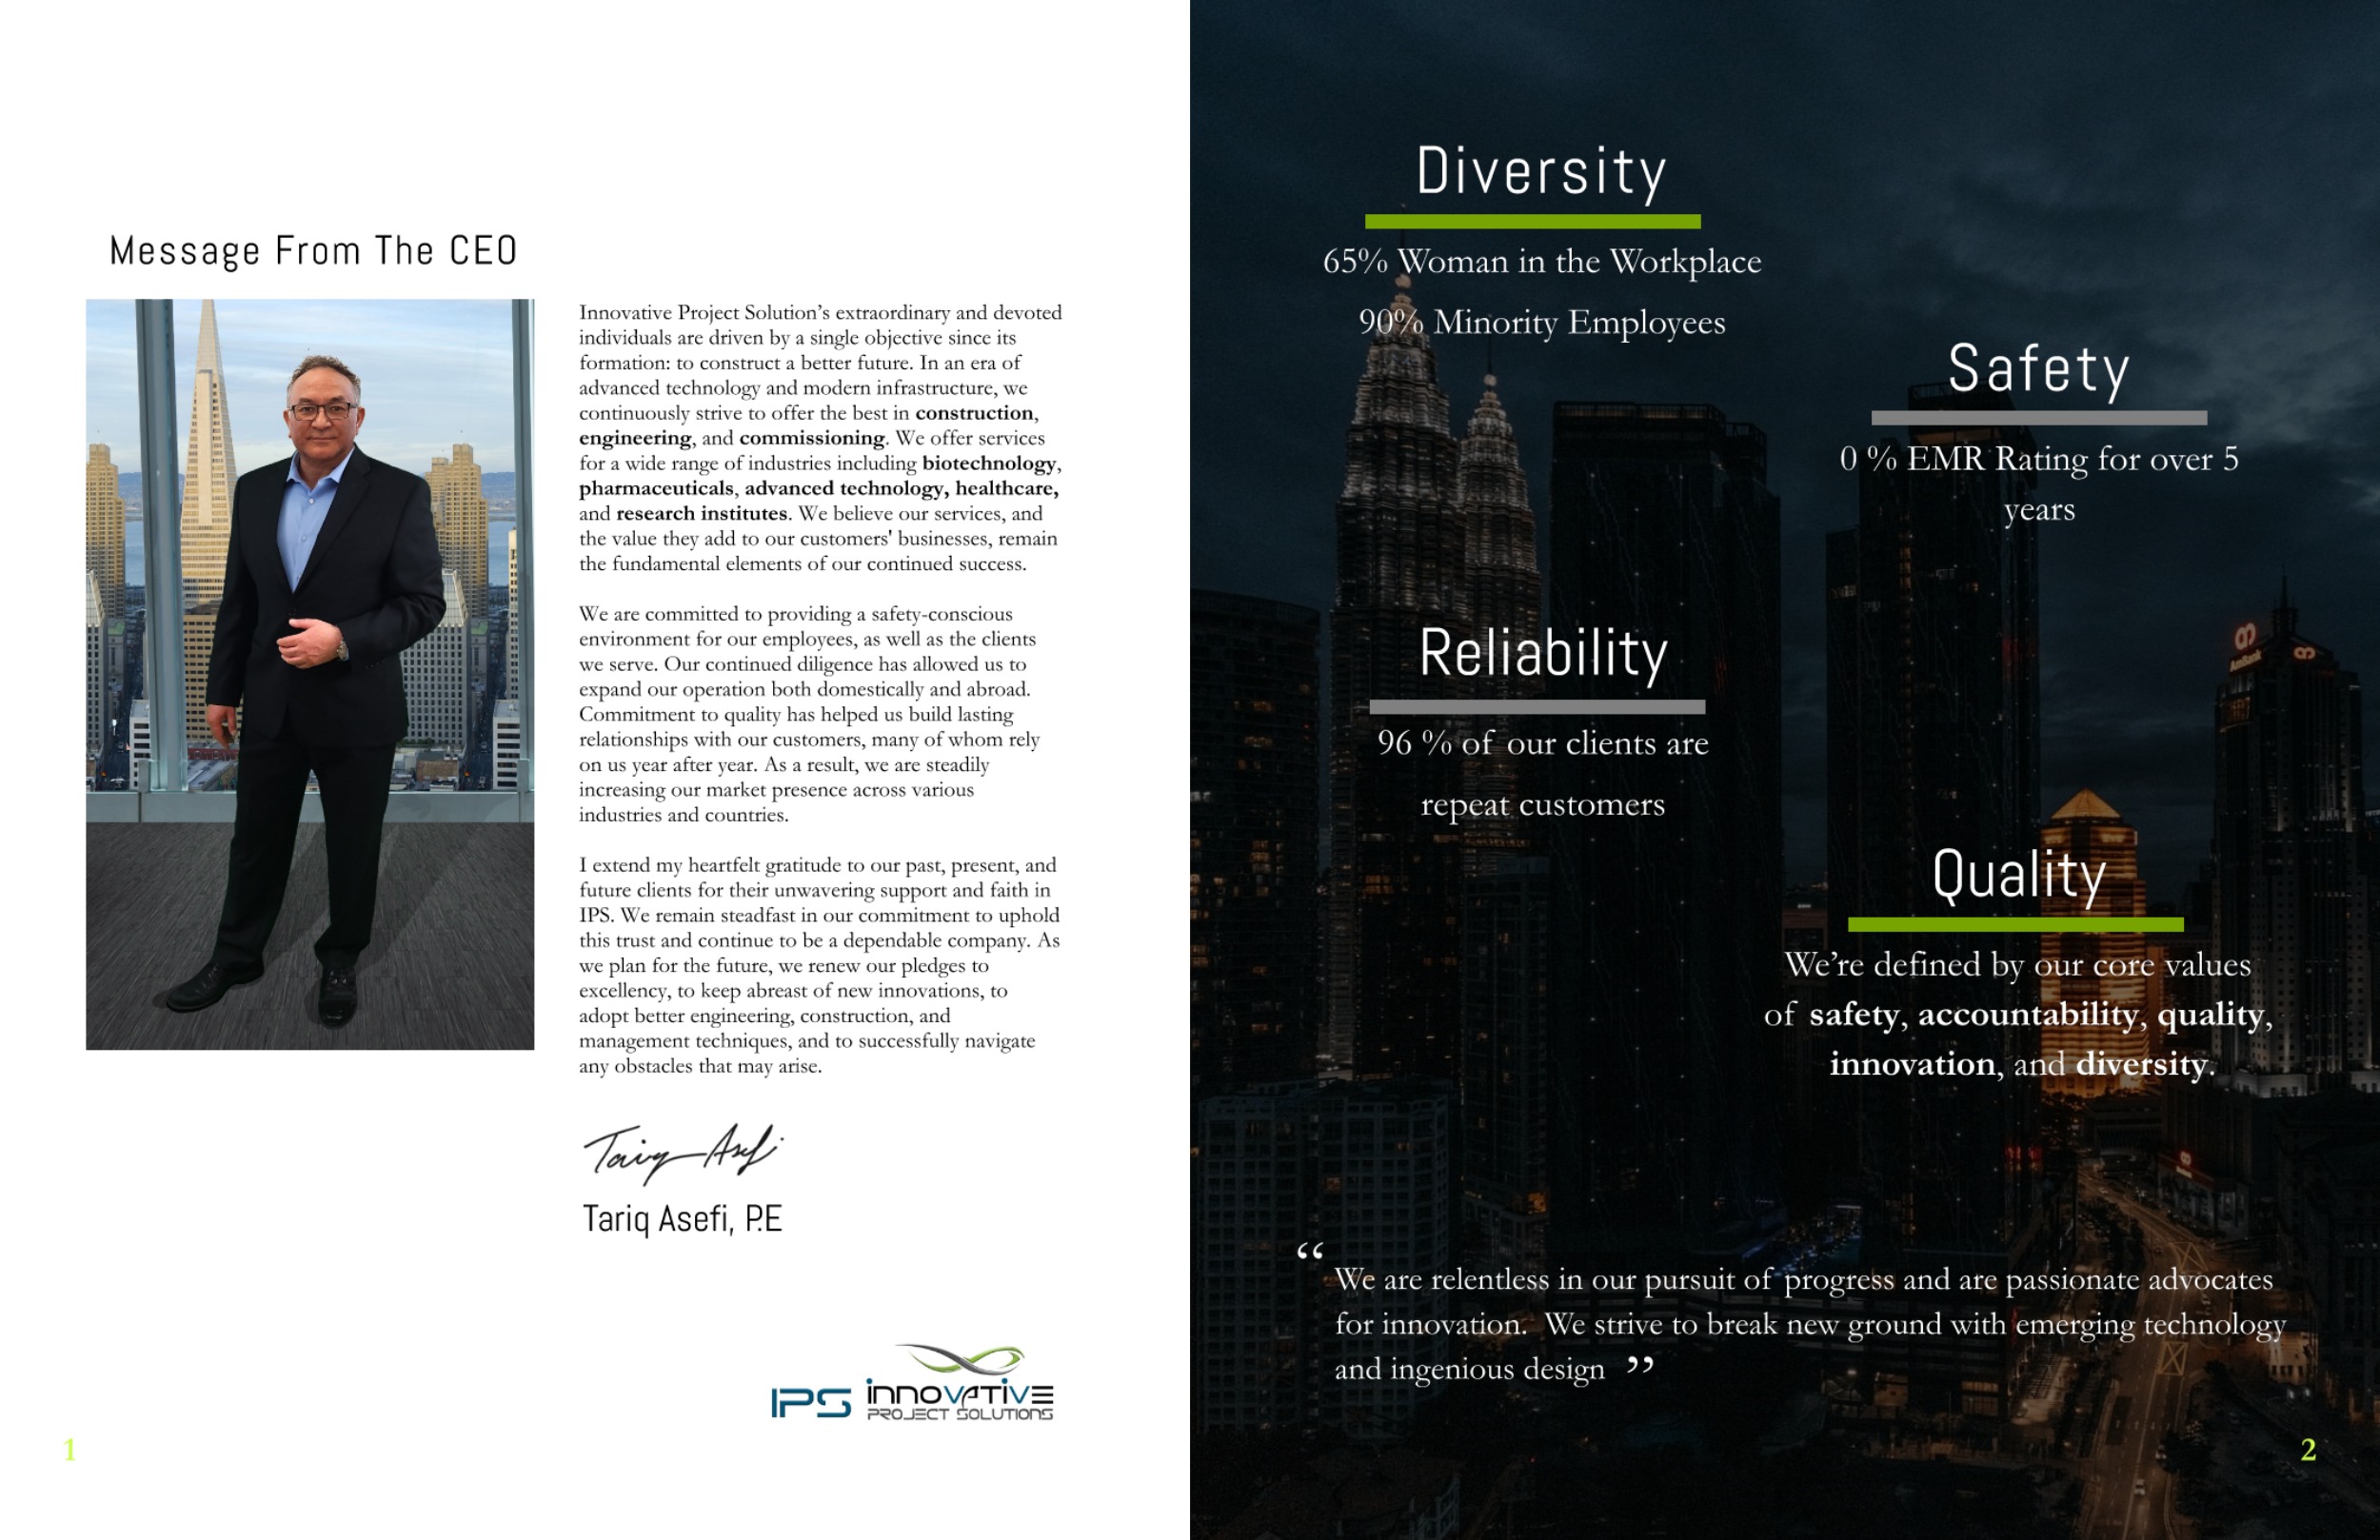 IPS Capabilities Booklet with message from the CEO on the left page and IPS values on the right page.